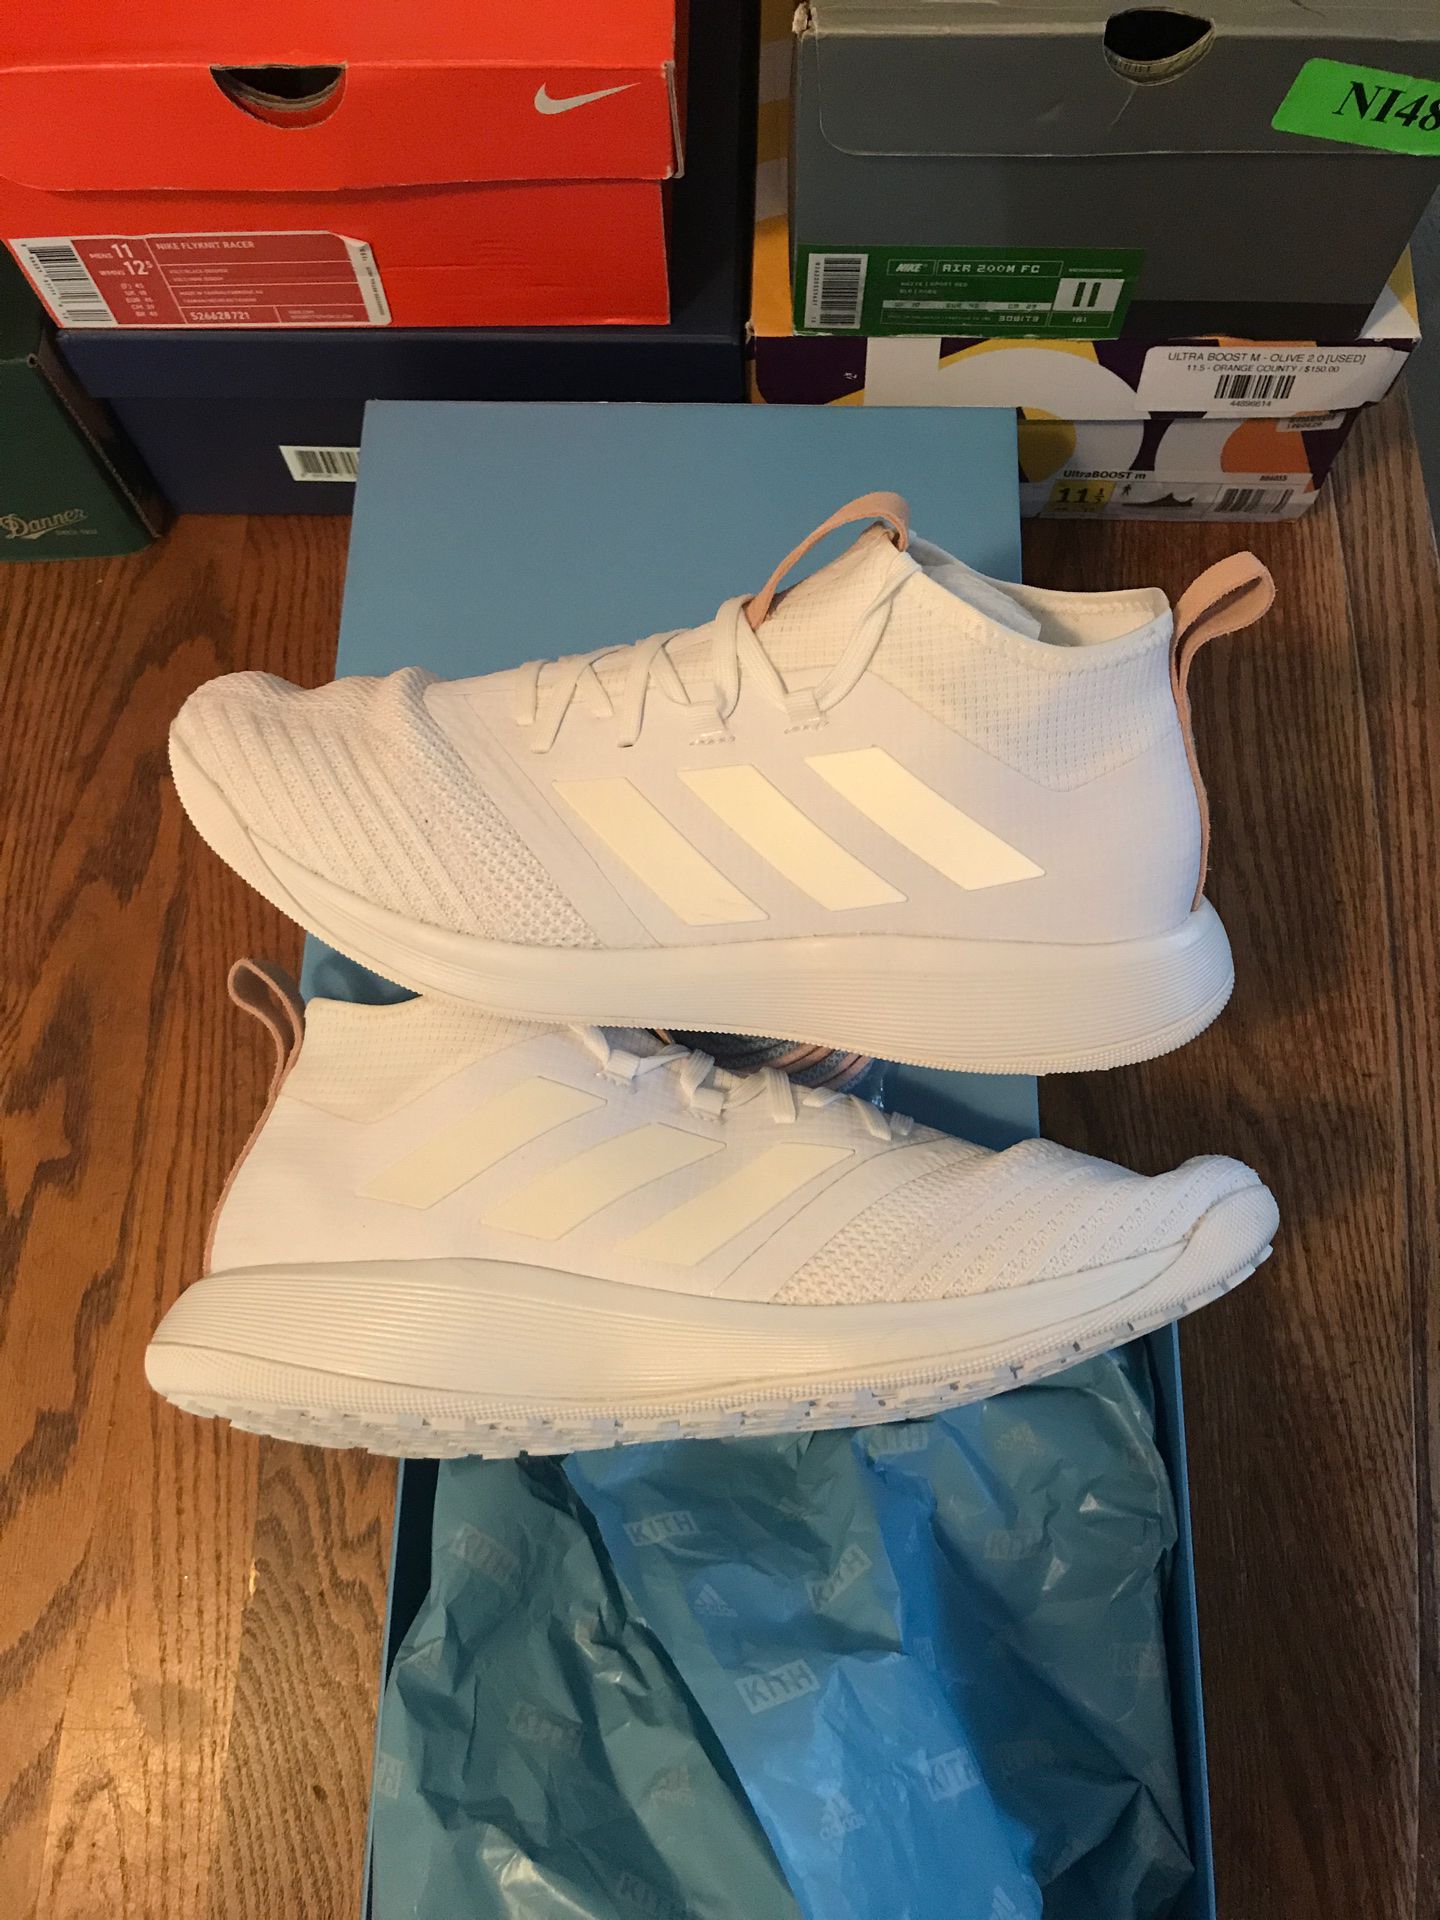 KITH Adidas Ace 17+ size 11.5 DEADSTOCK